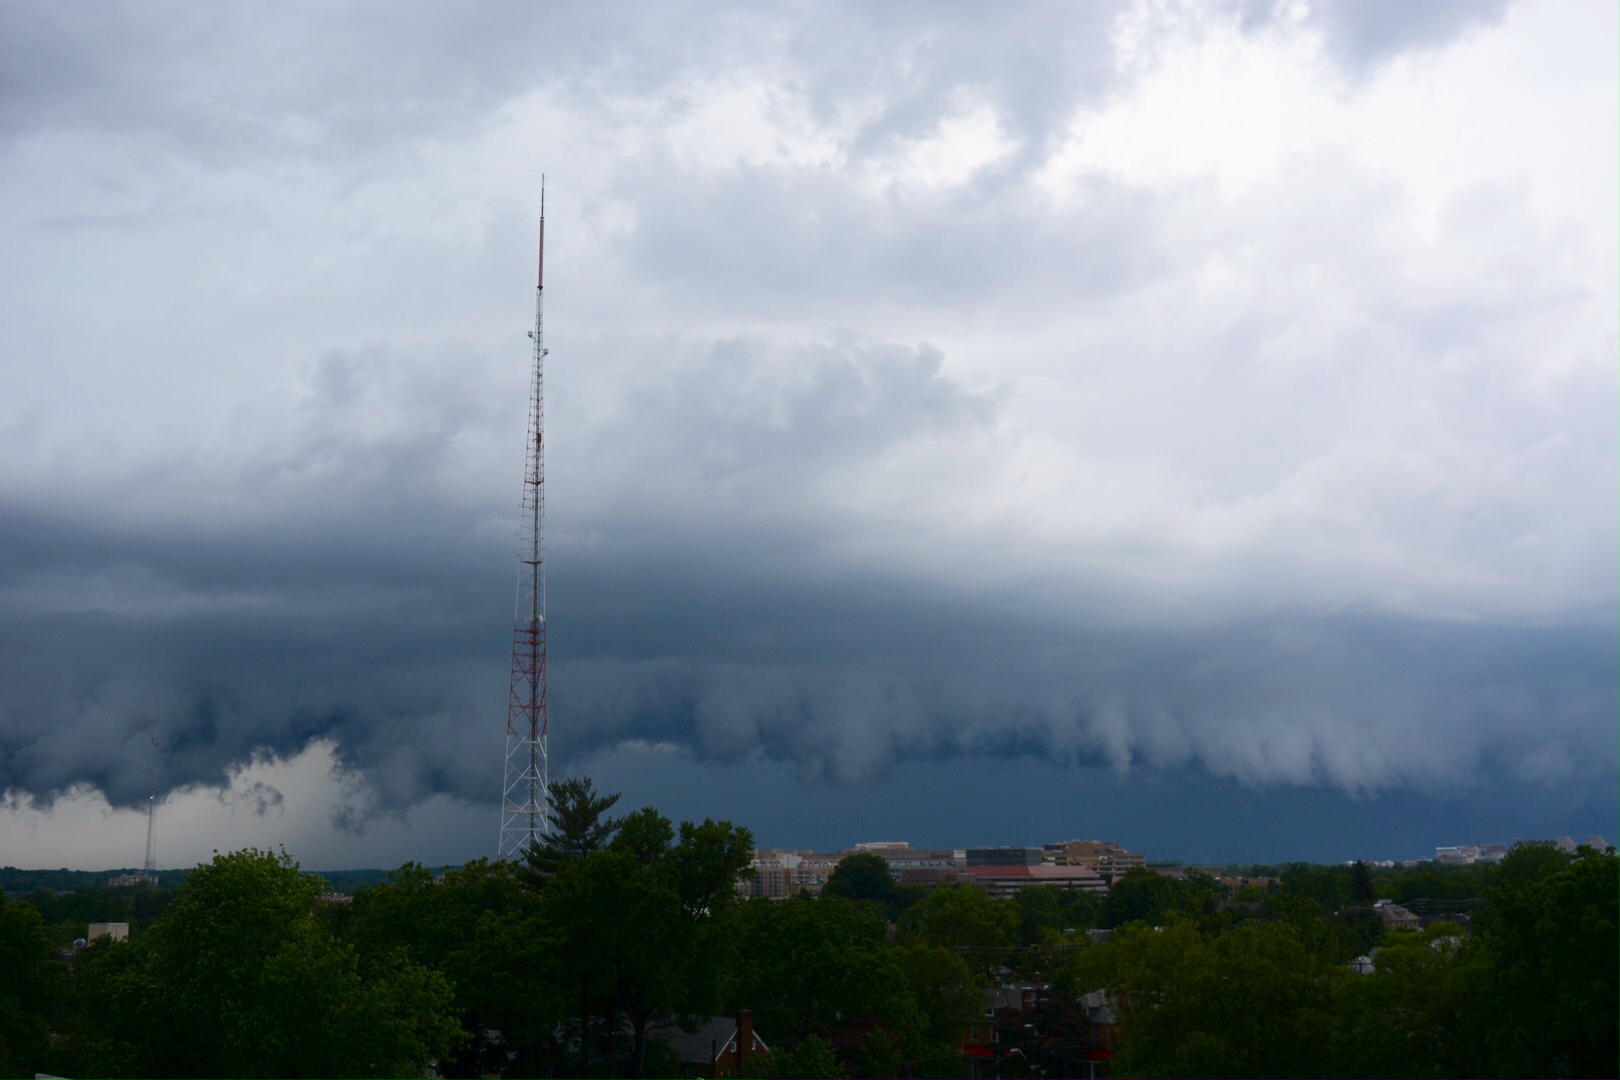 Gallery: Start of June brings thunderstorms, flooding to D.C. area